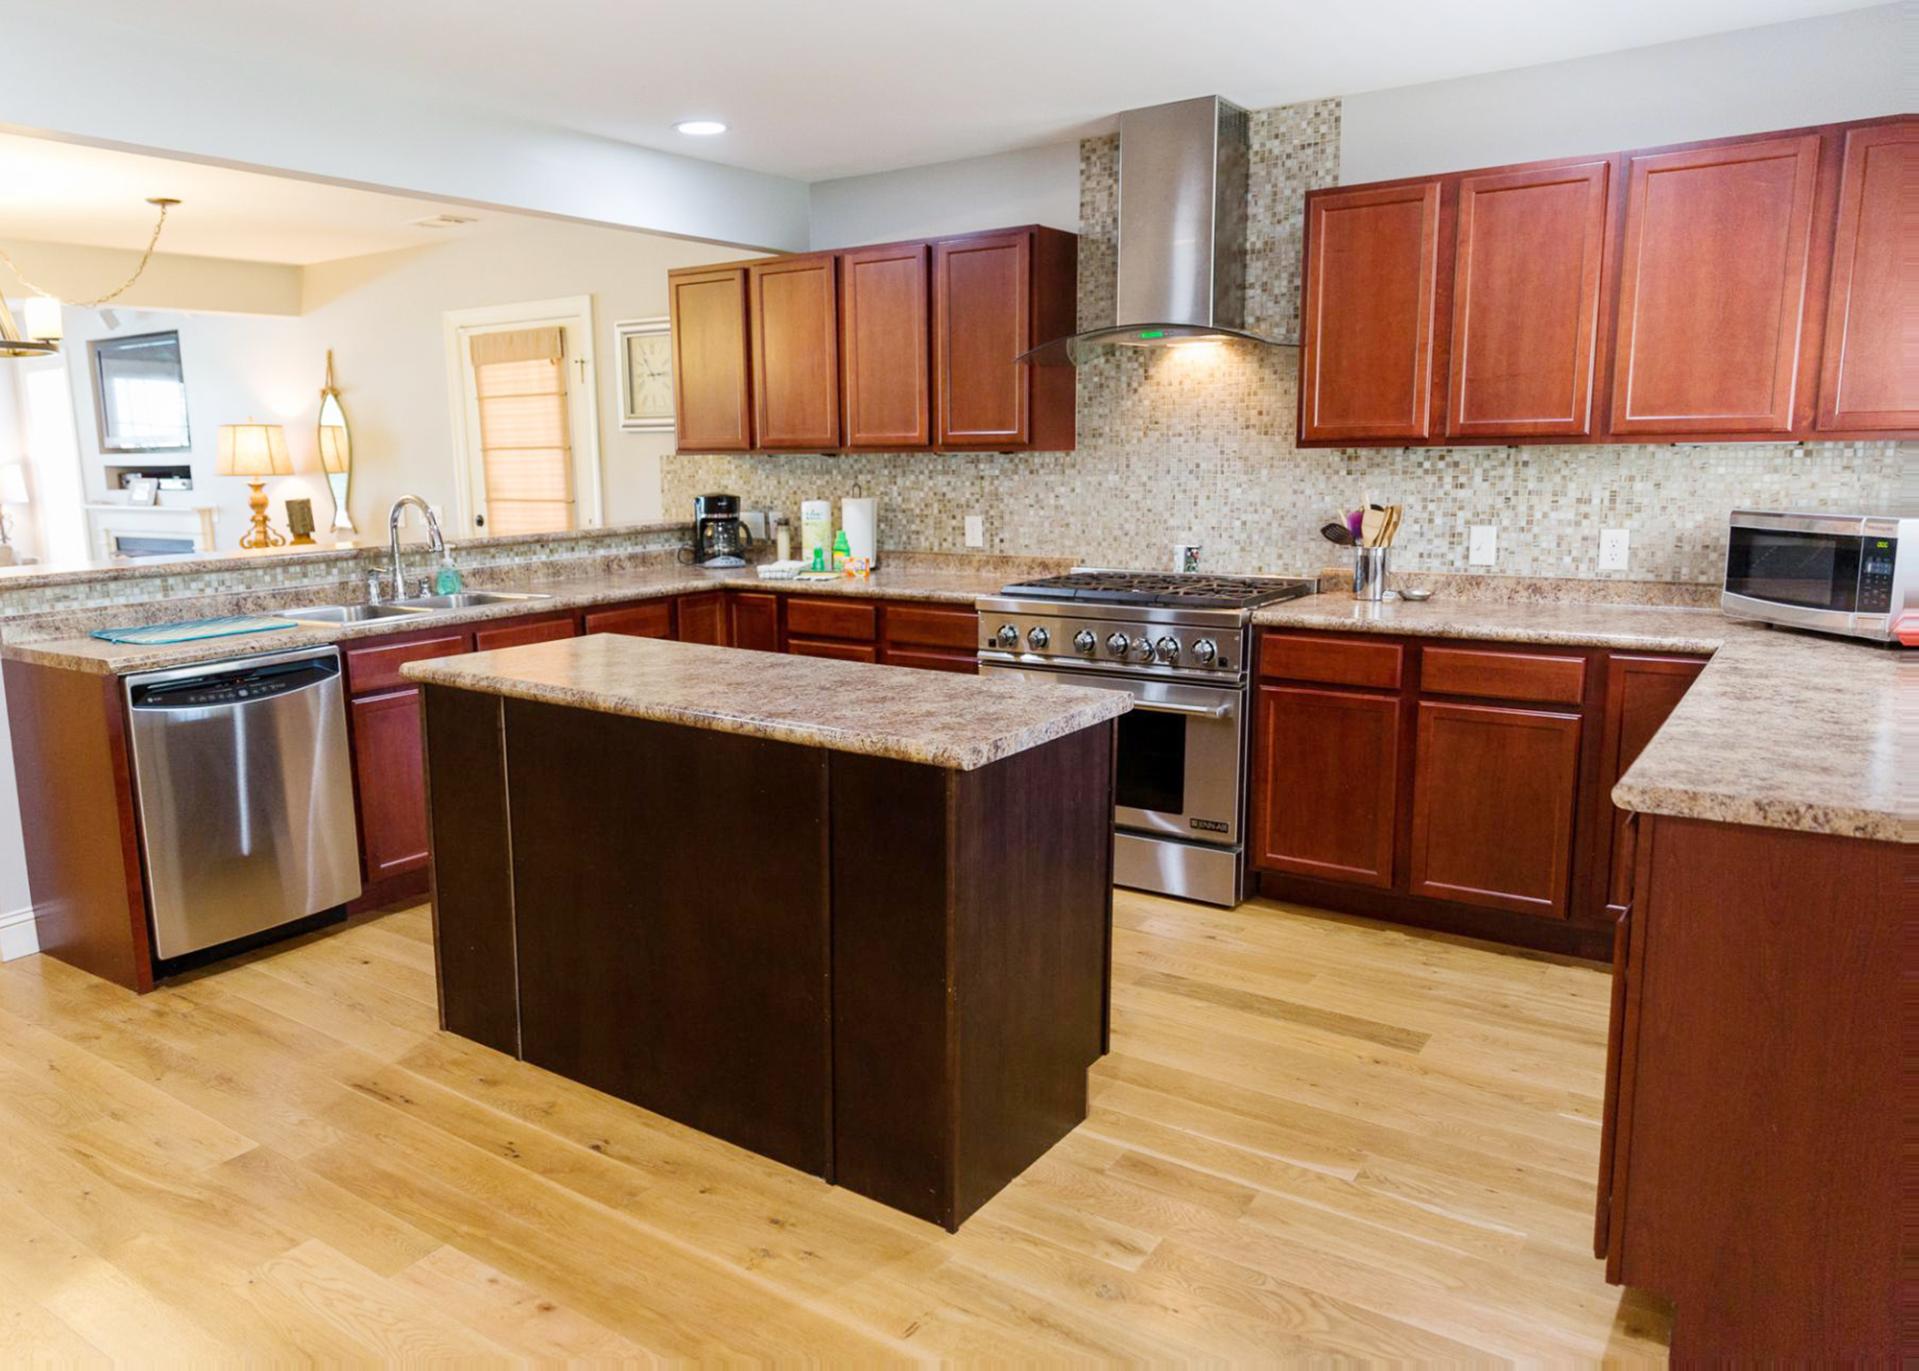 �Wonderful, gourmet kitchen with all of the amenities